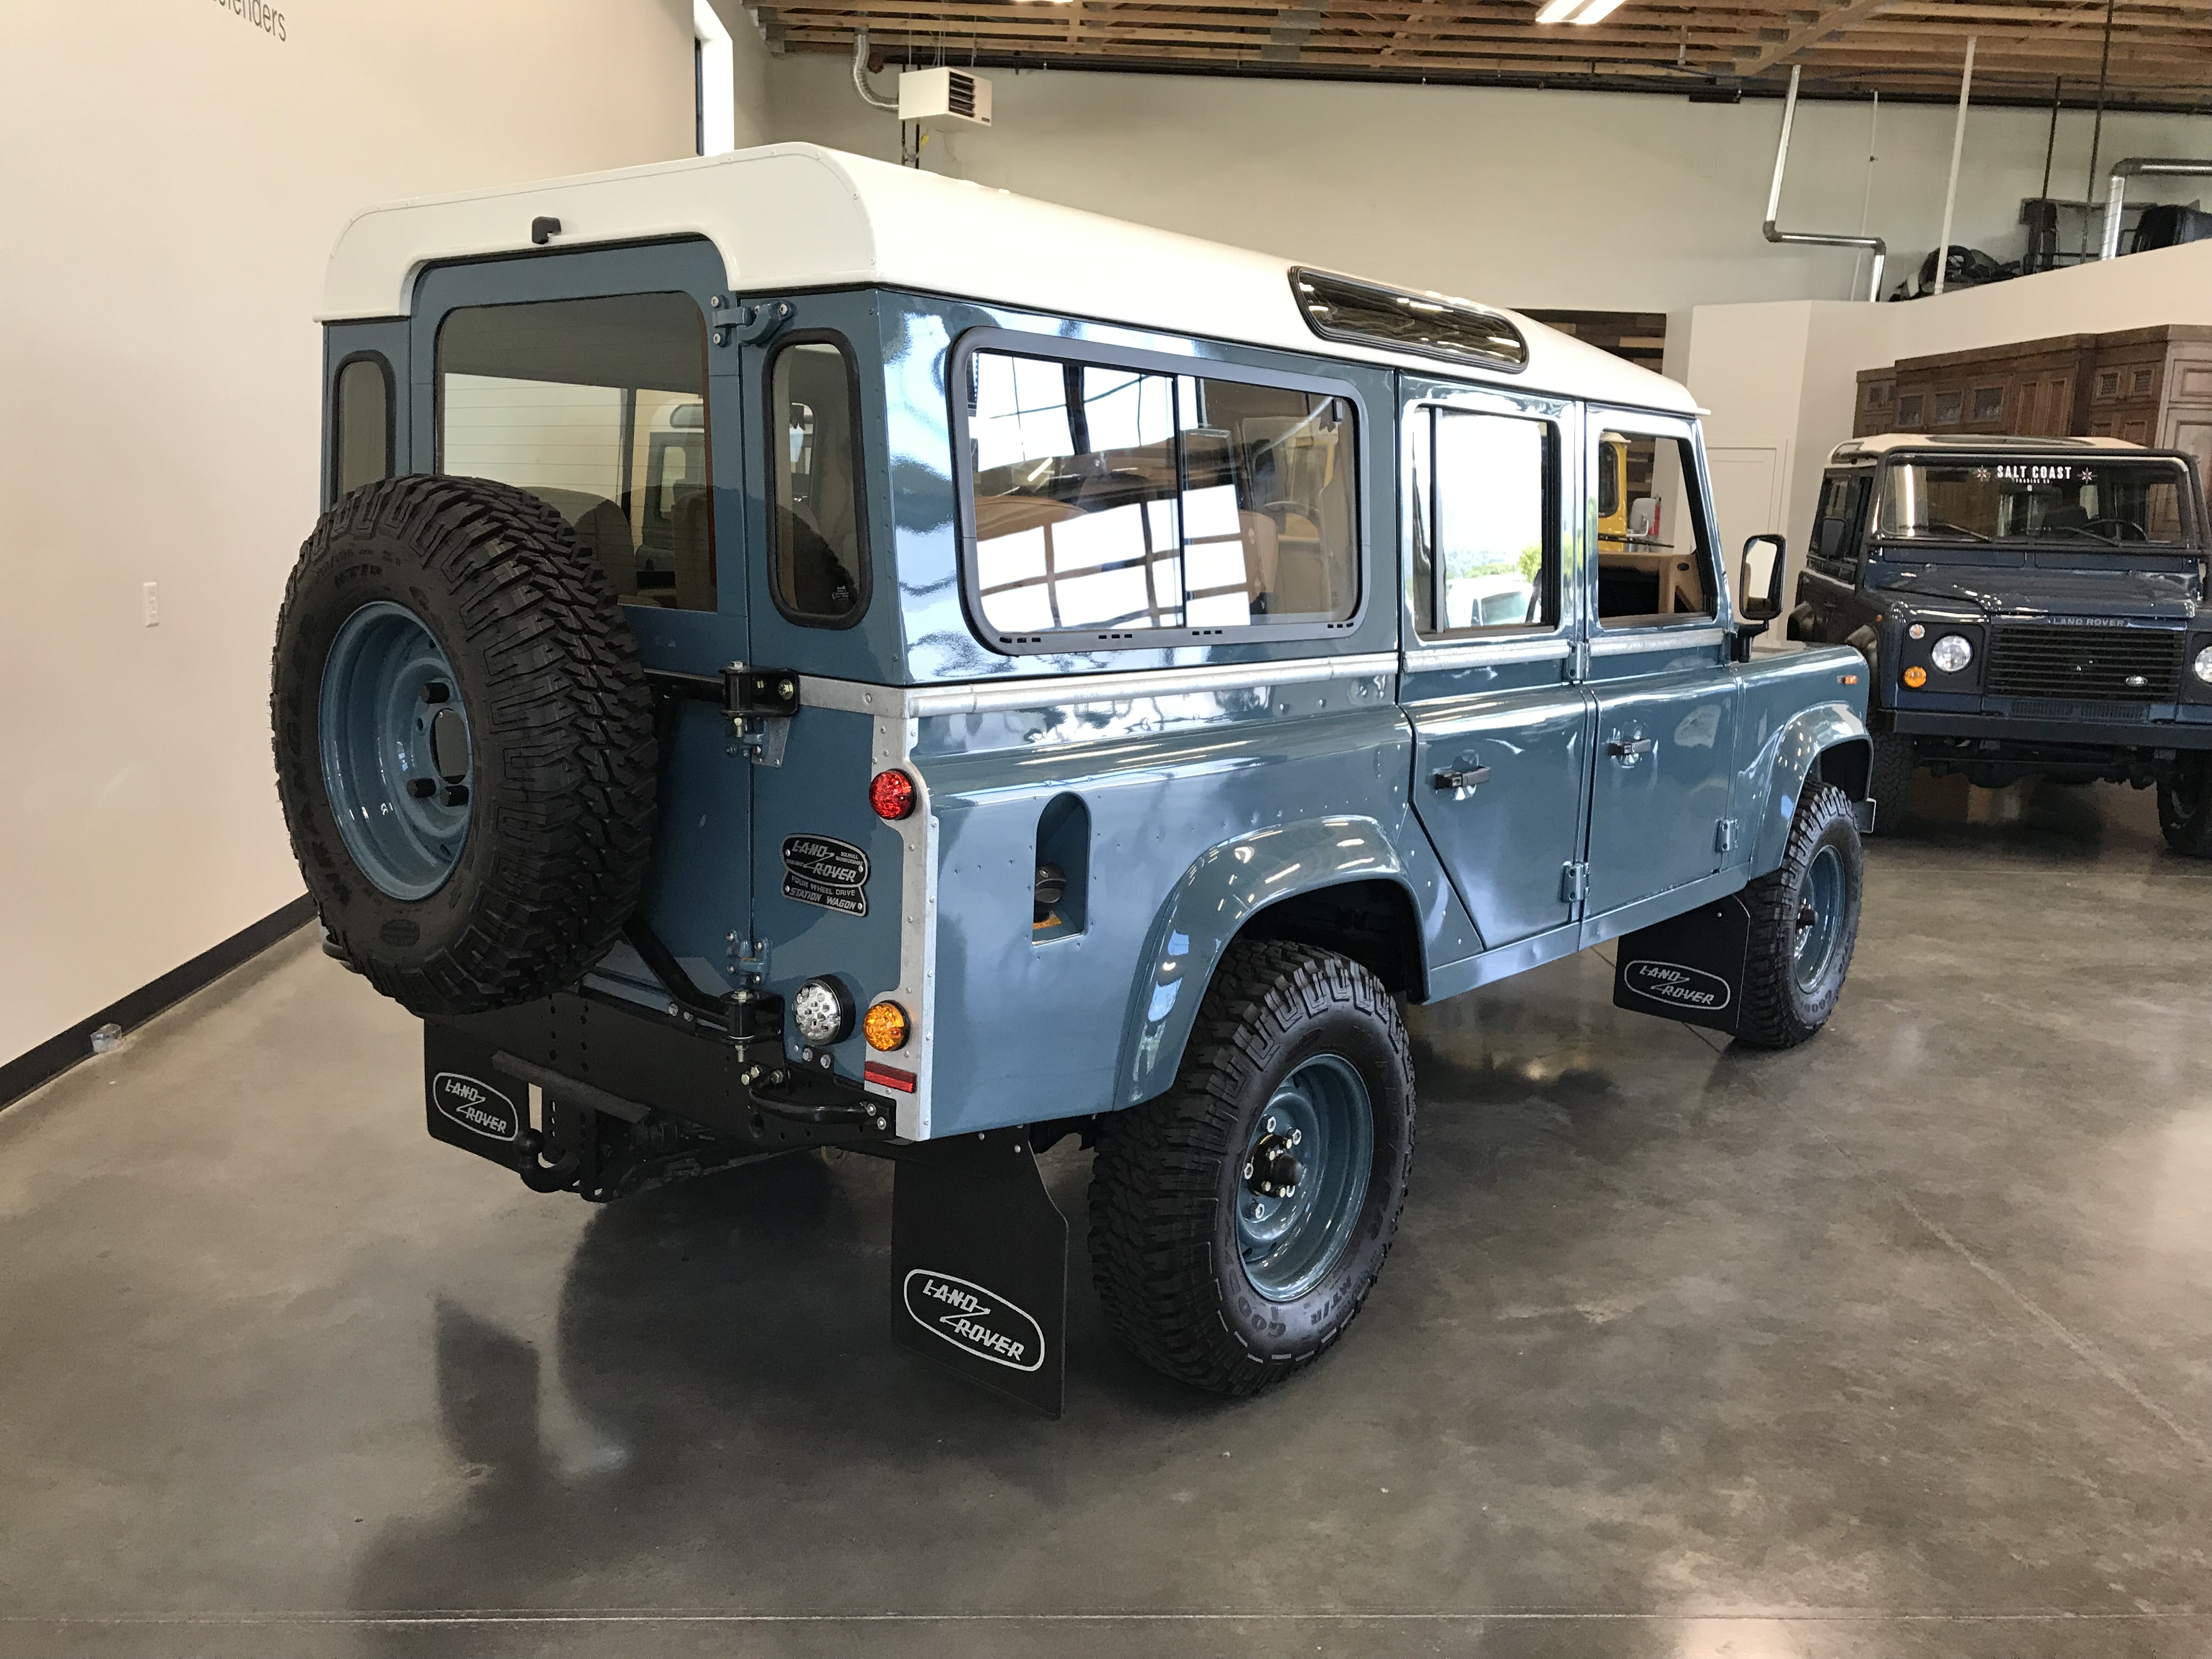 PreOwned 1992 Land Rover Defender 110 in Bountiful 